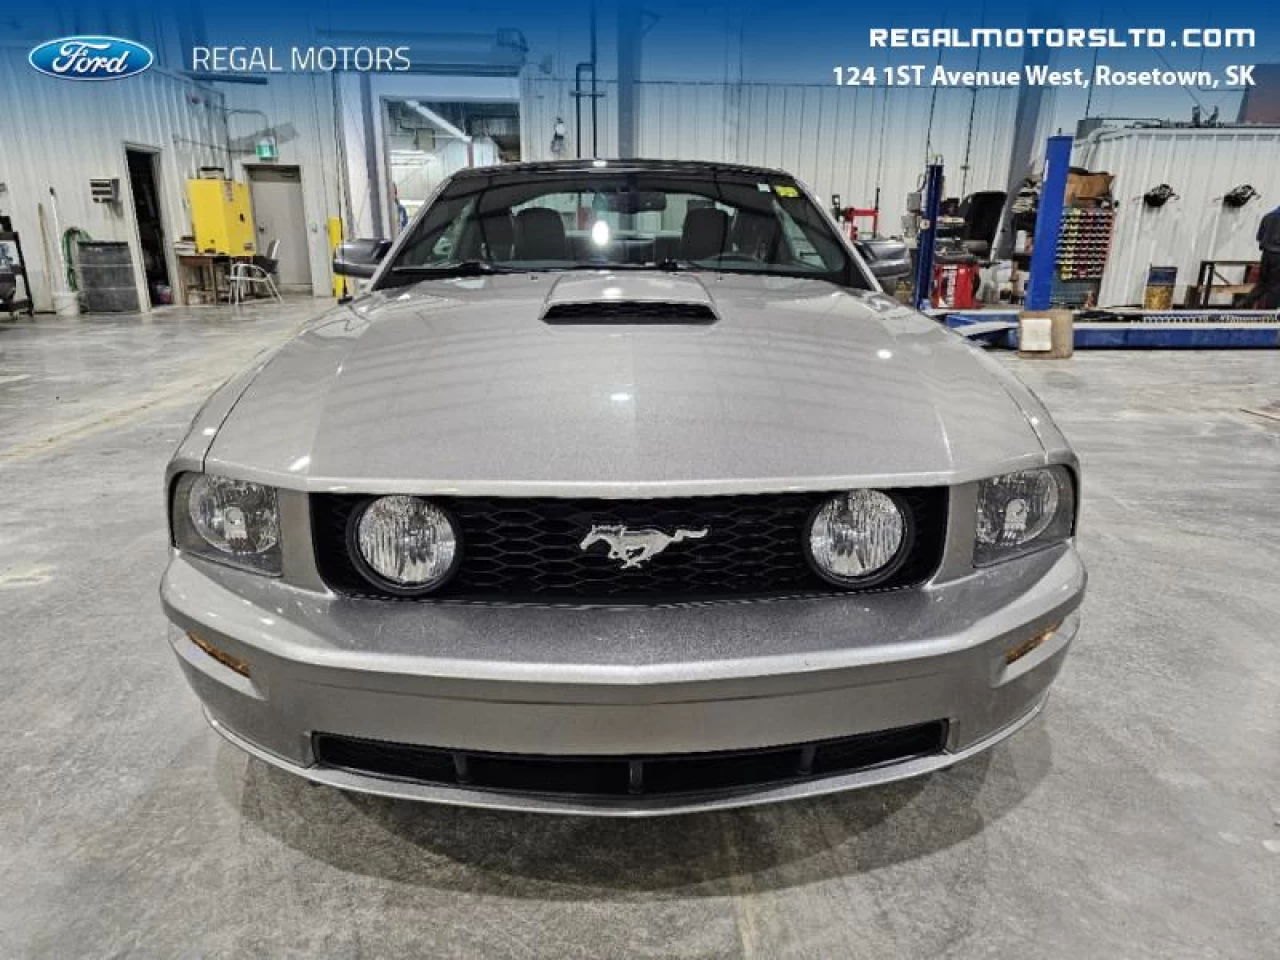 2009 Ford Mustang MUSTANG GT COUPE Main Image